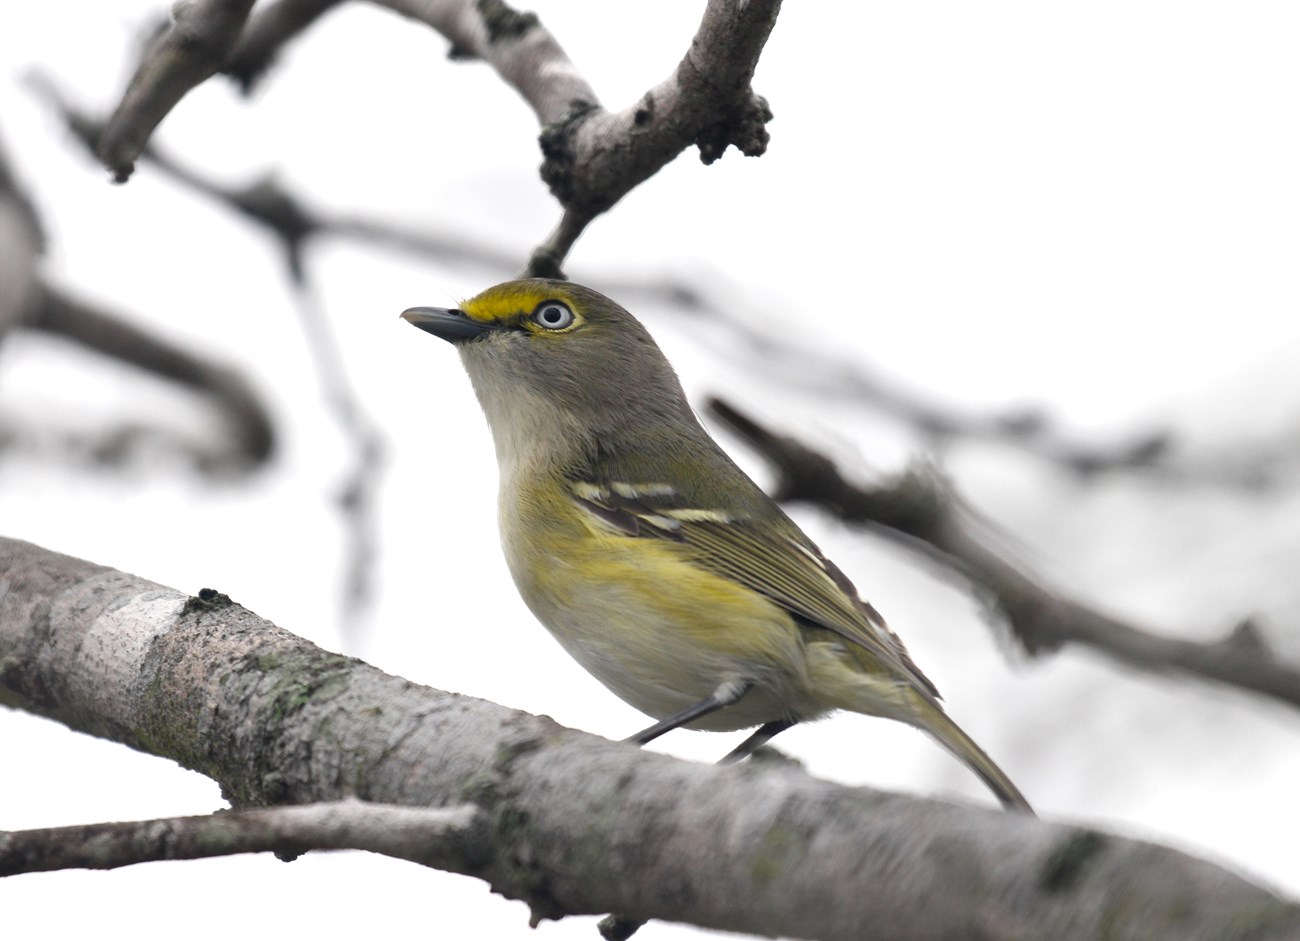 A white-eyed vireo perched on a branch